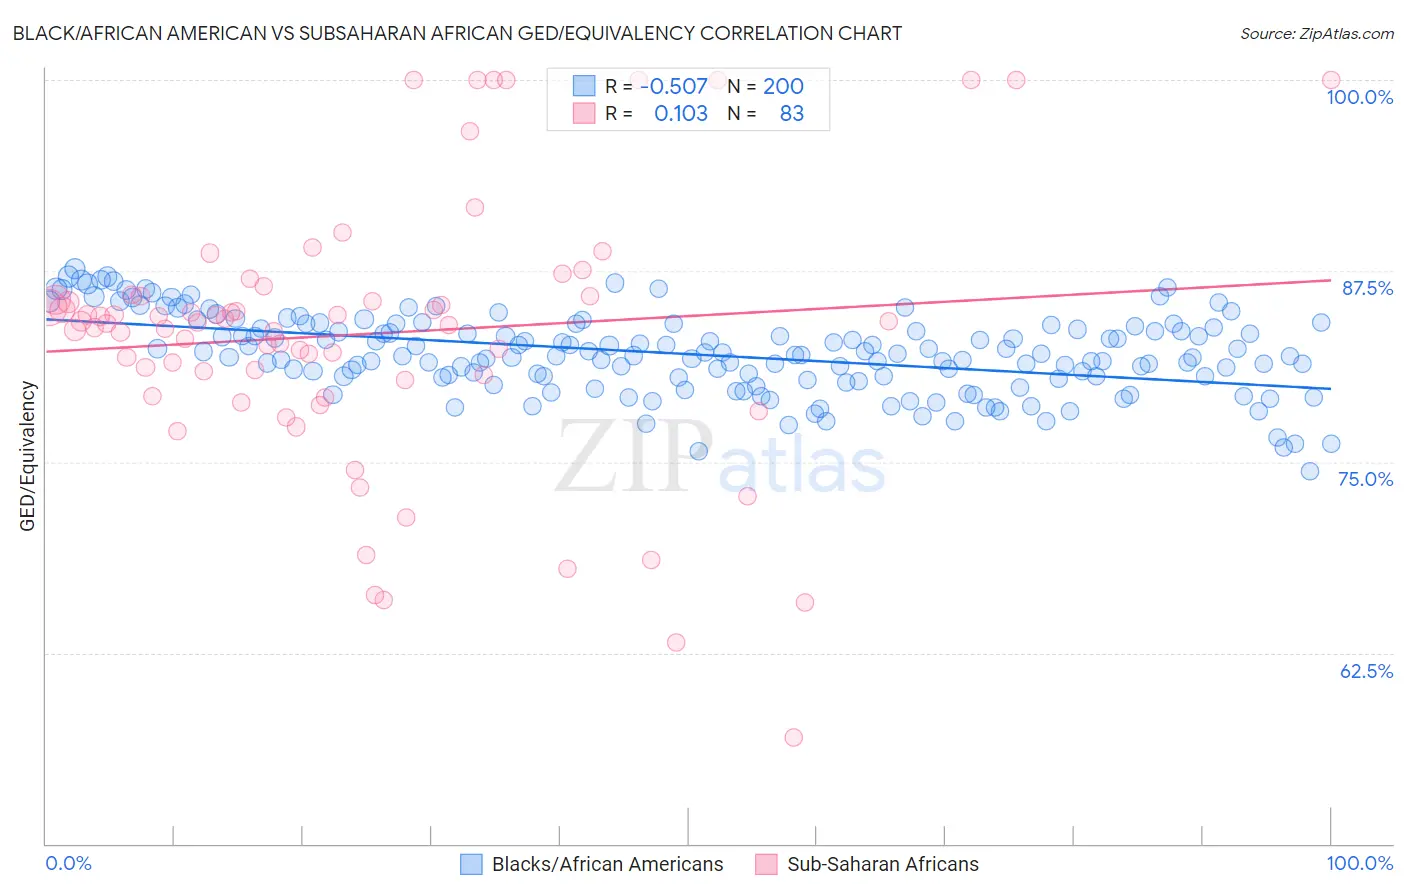 Black/African American vs Subsaharan African GED/Equivalency